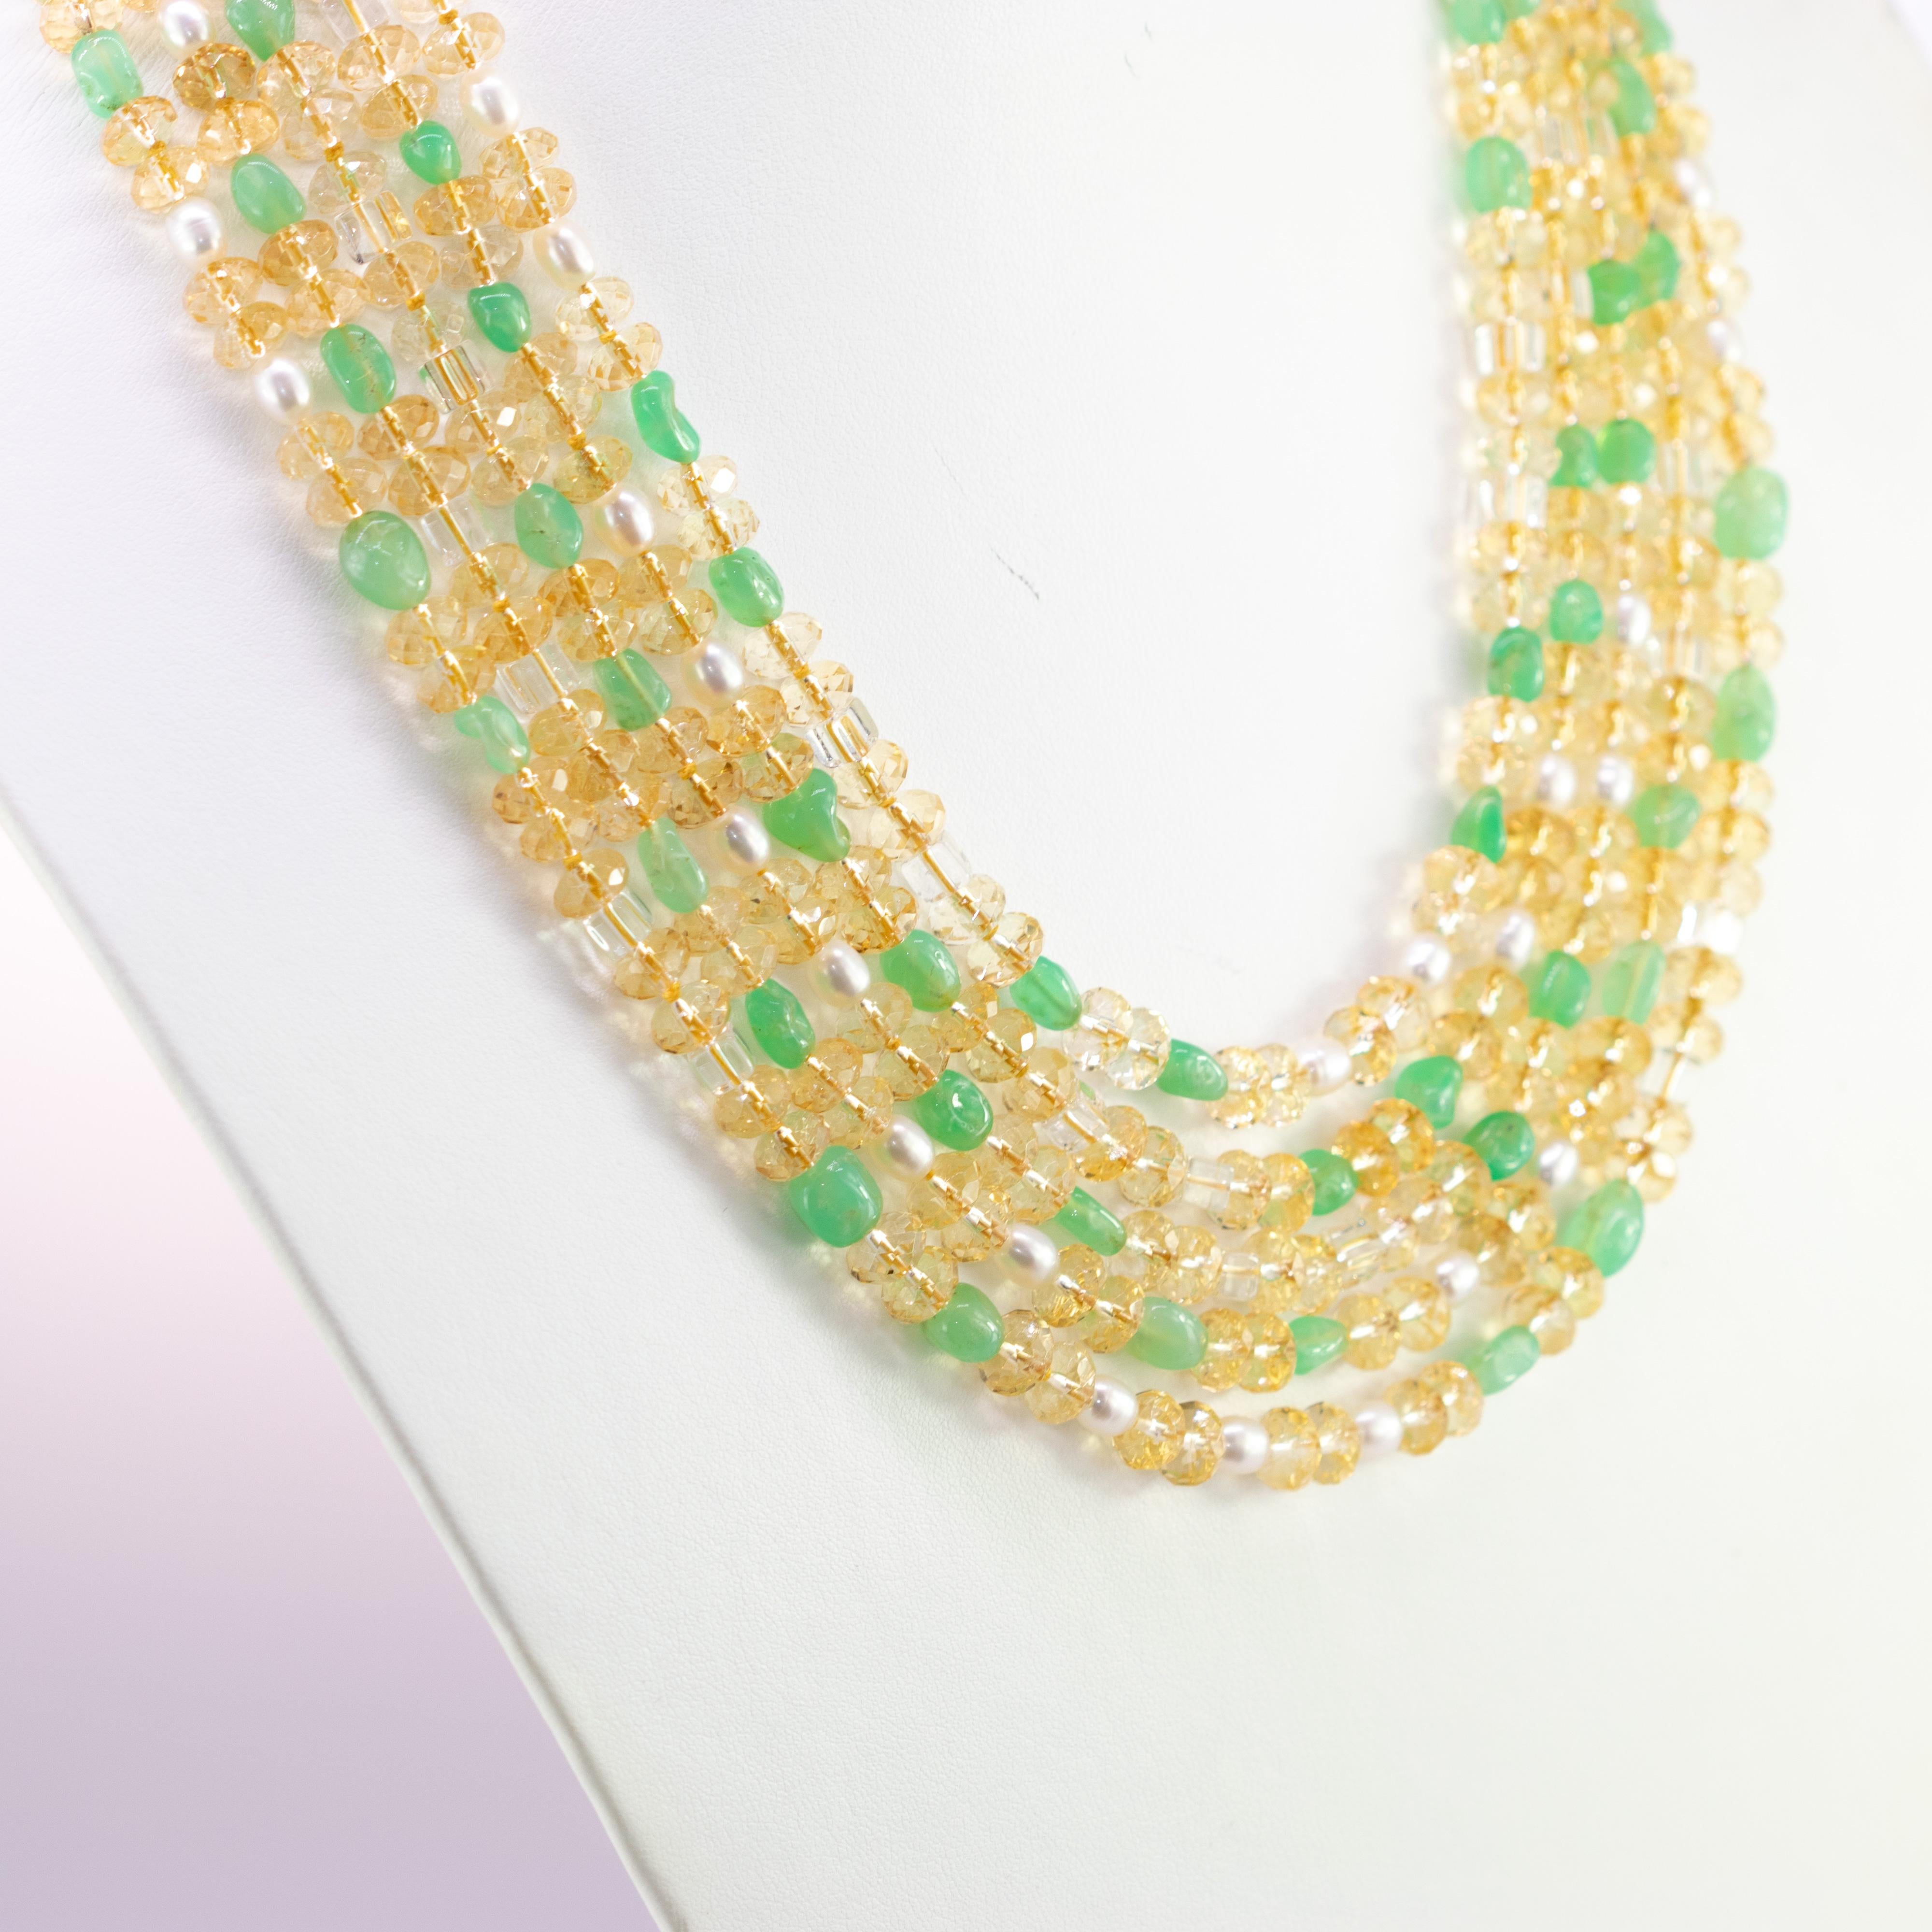 Charming necklace with citrine quartz, fresh water pearls and chrysoprase. A necklace designed for any occasion and look. Very discreet with light tones and luxury gemstones.

• 925 gilded silver
• Total number of strands 5
• Total length 45 cm

At